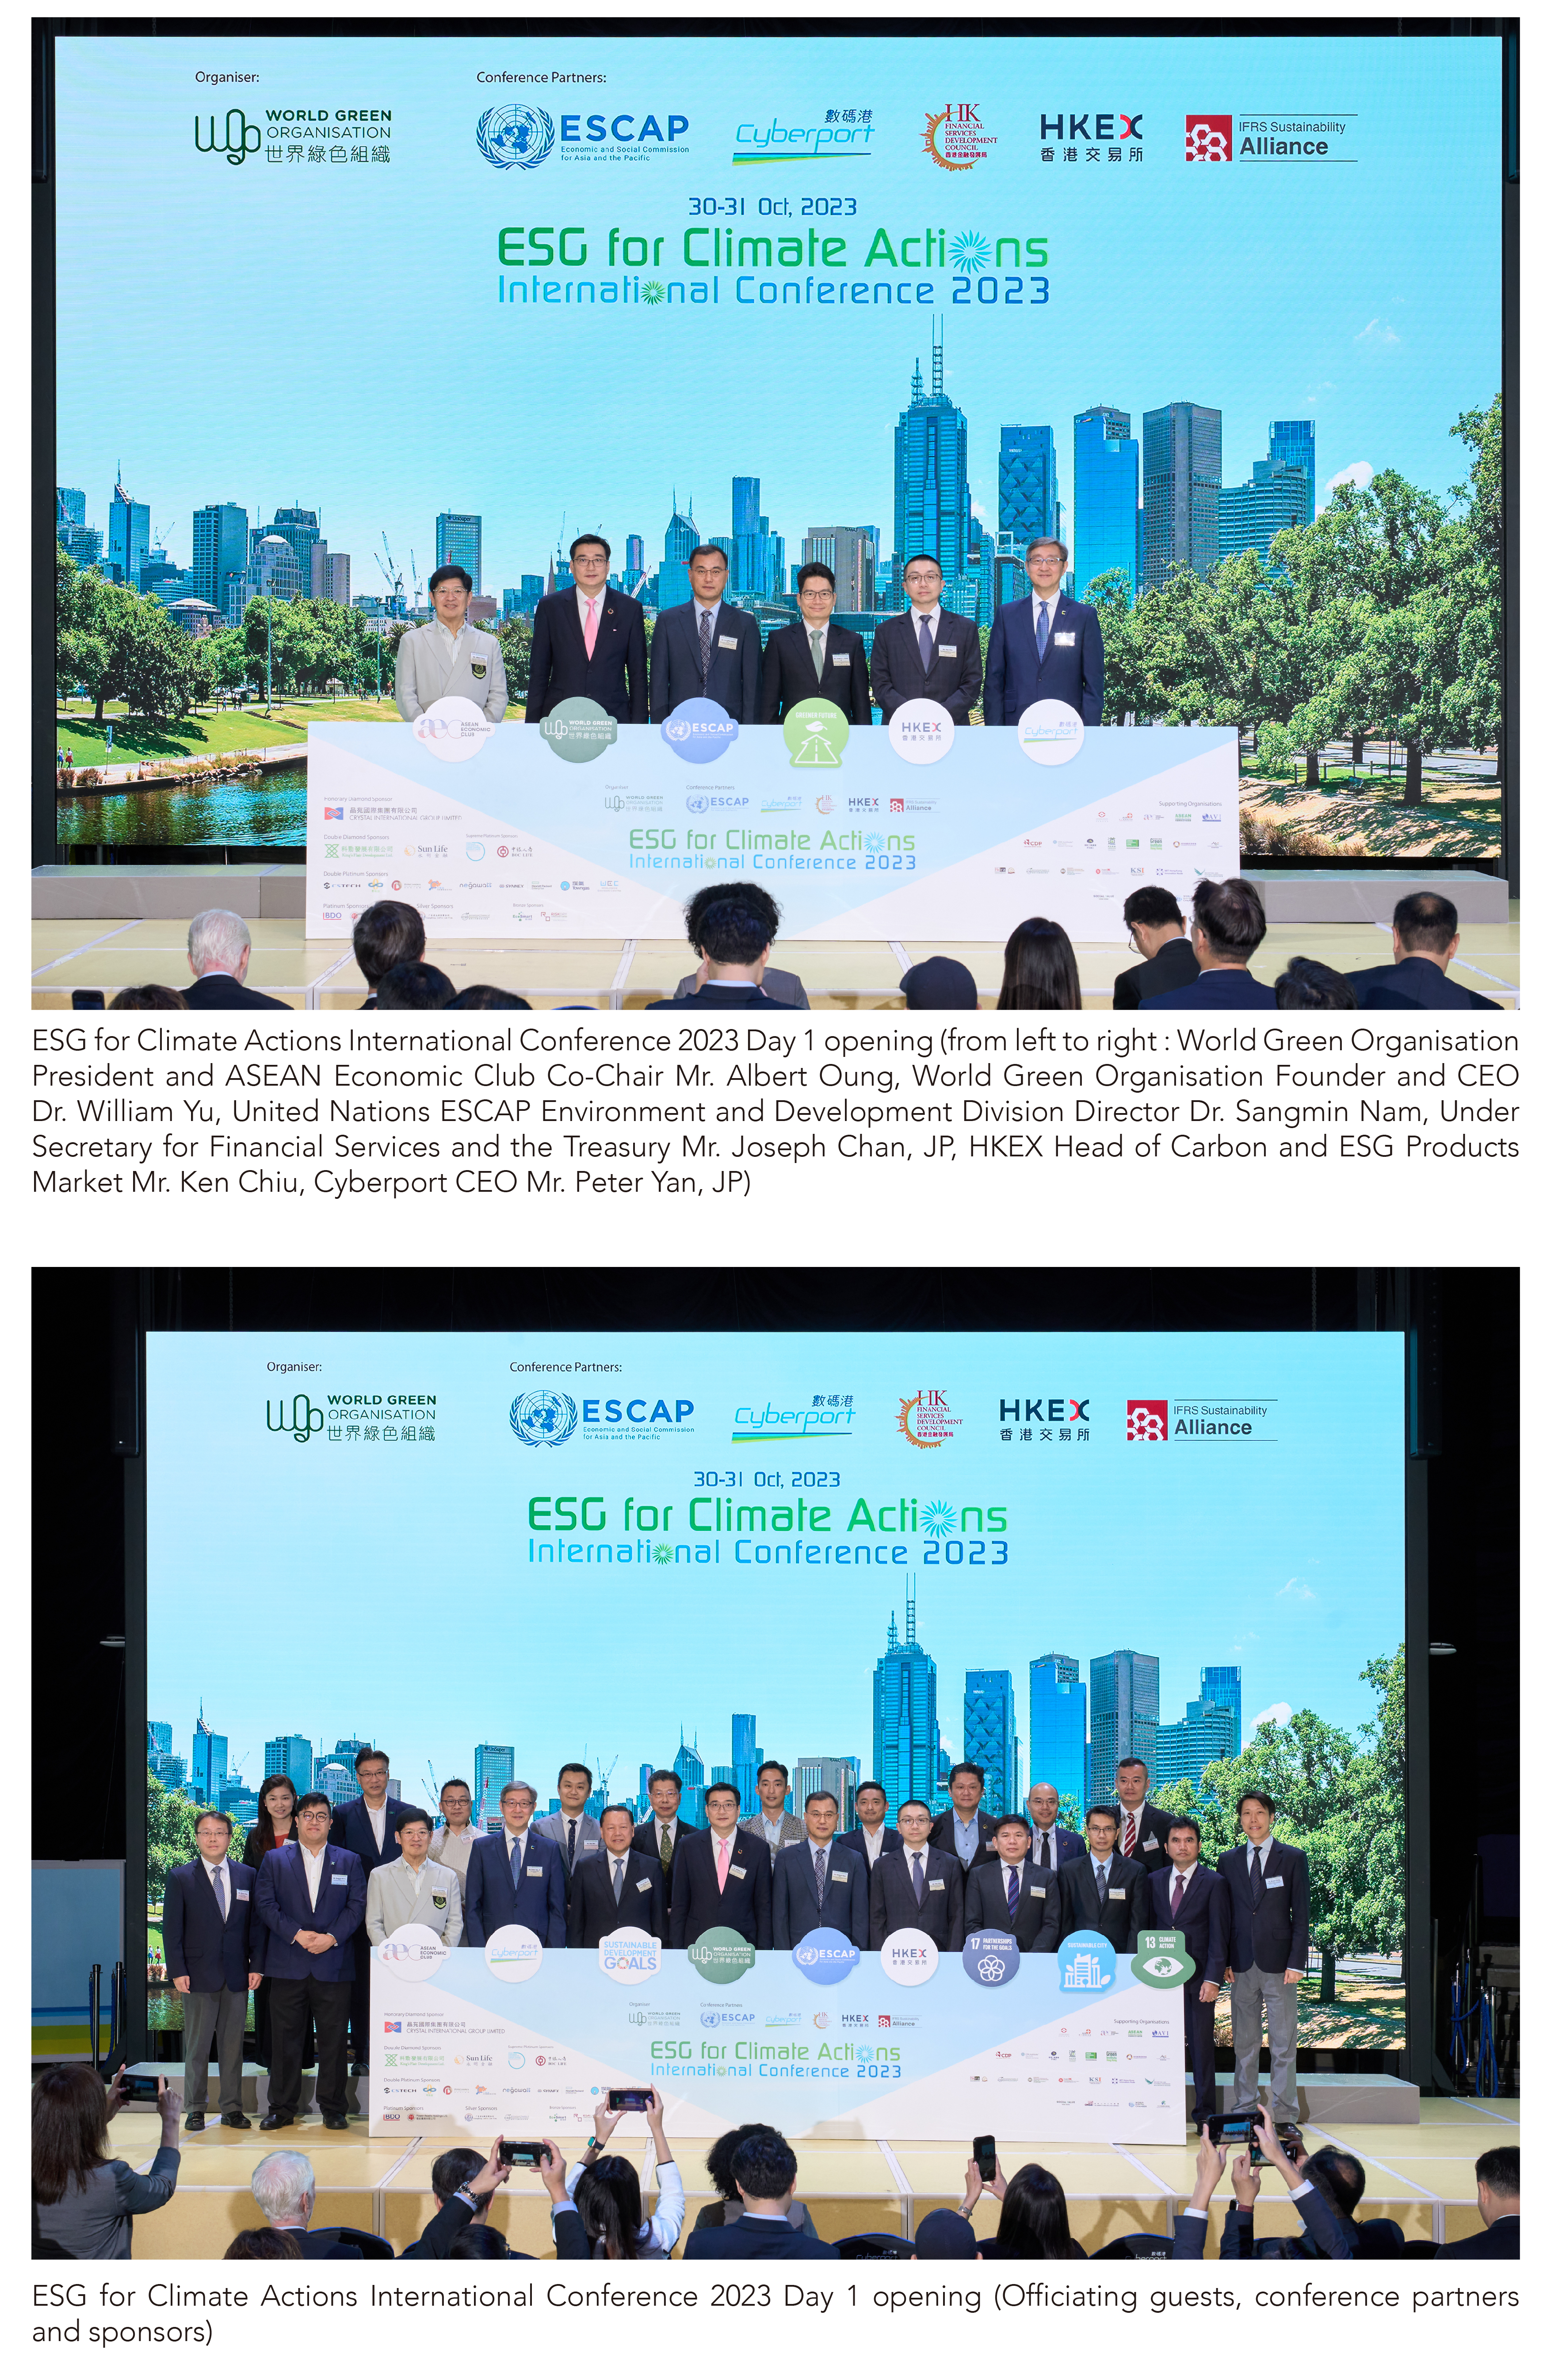 ESG for Climate Actions International Conference 2023 Day 1